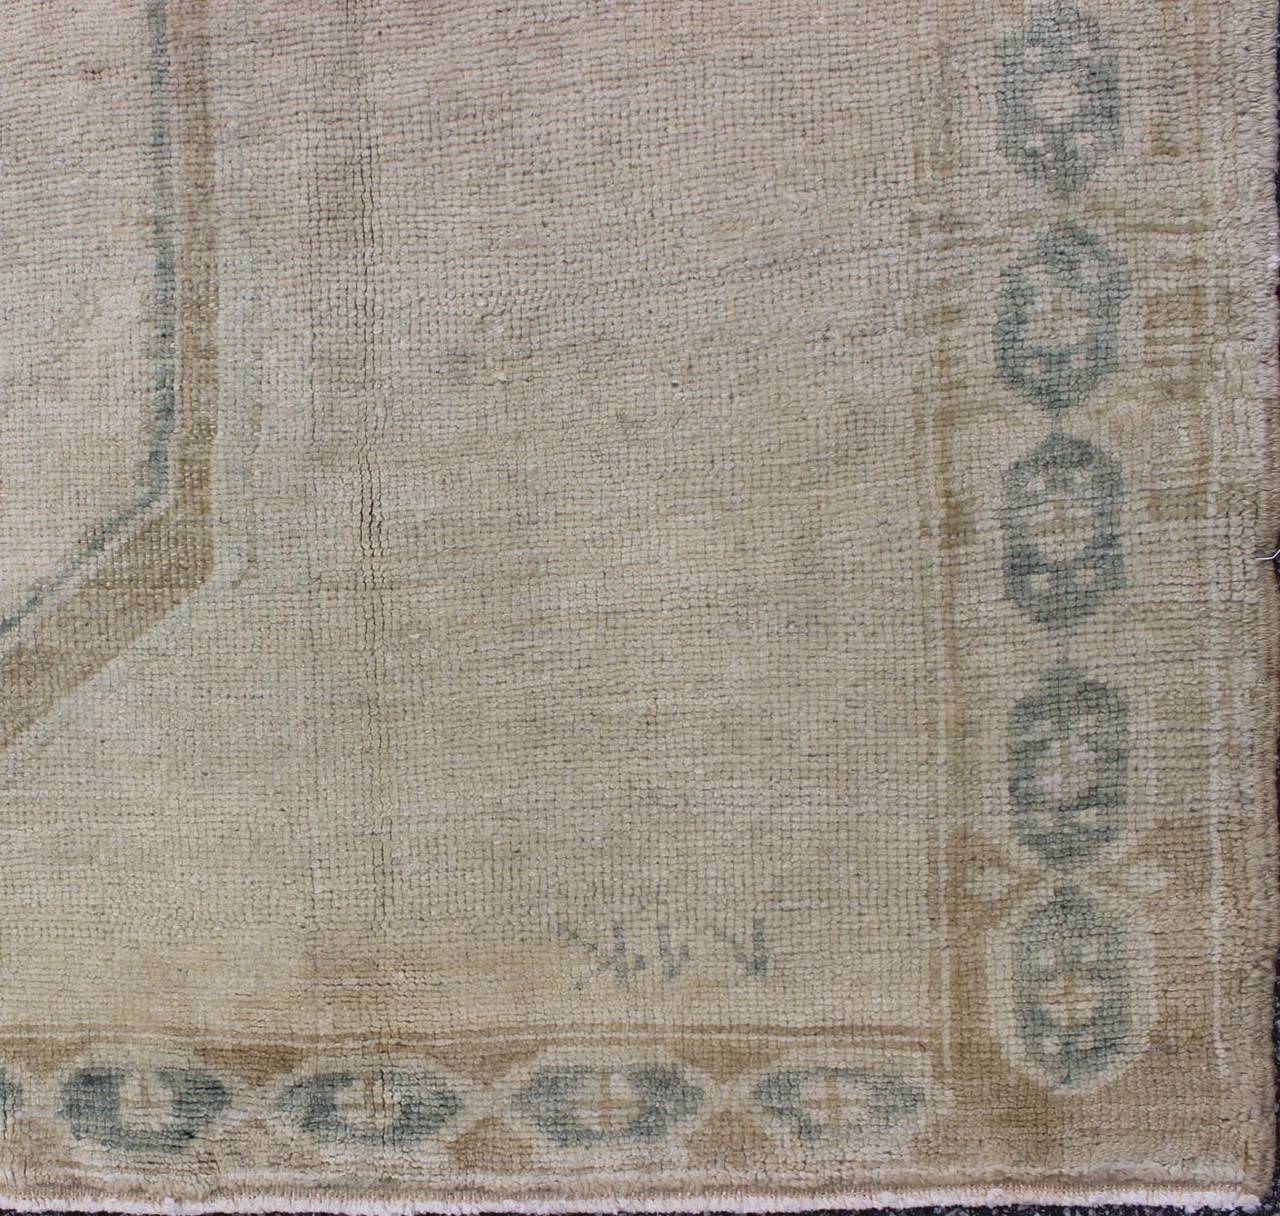 This vintage Oushak features medallions with the simplicity of a tribal design and elegance of a soft color pallet. The light blue border is characterized by a repeating chain design.
Measures: 4'7 x 10'1.